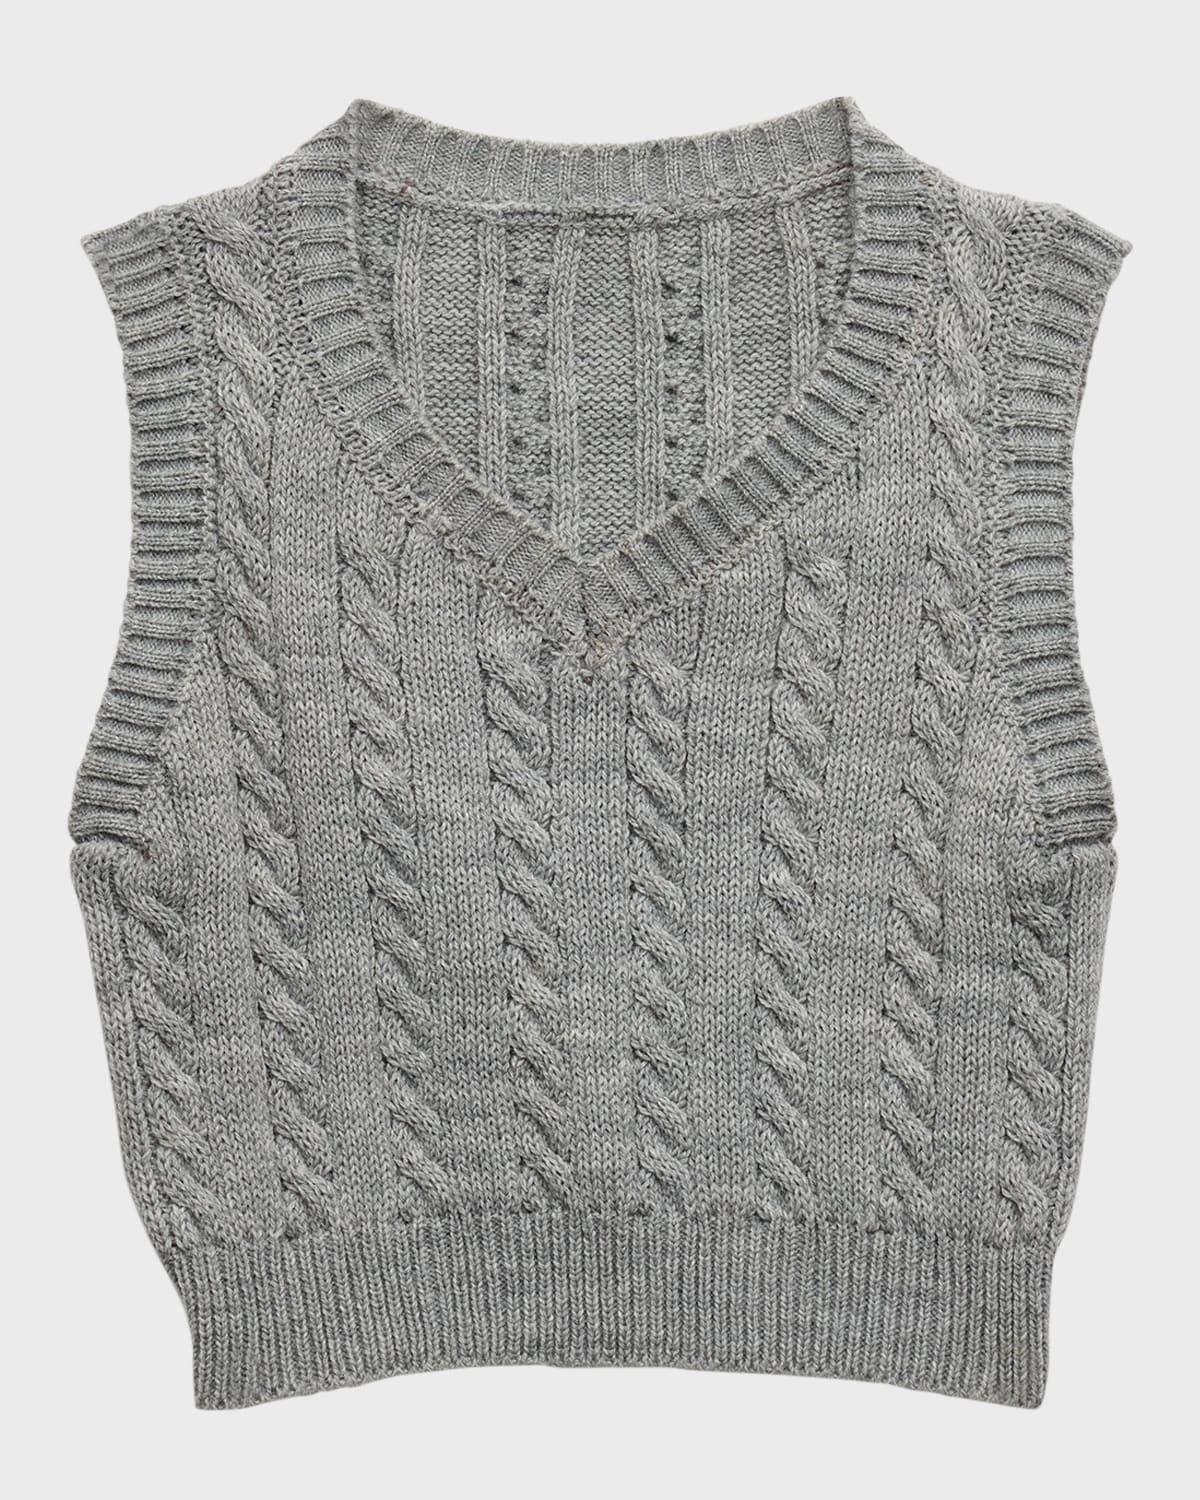 Girl's Cable Knit Sweater Vest, Size S-XL by FLOWERS BY ZOE